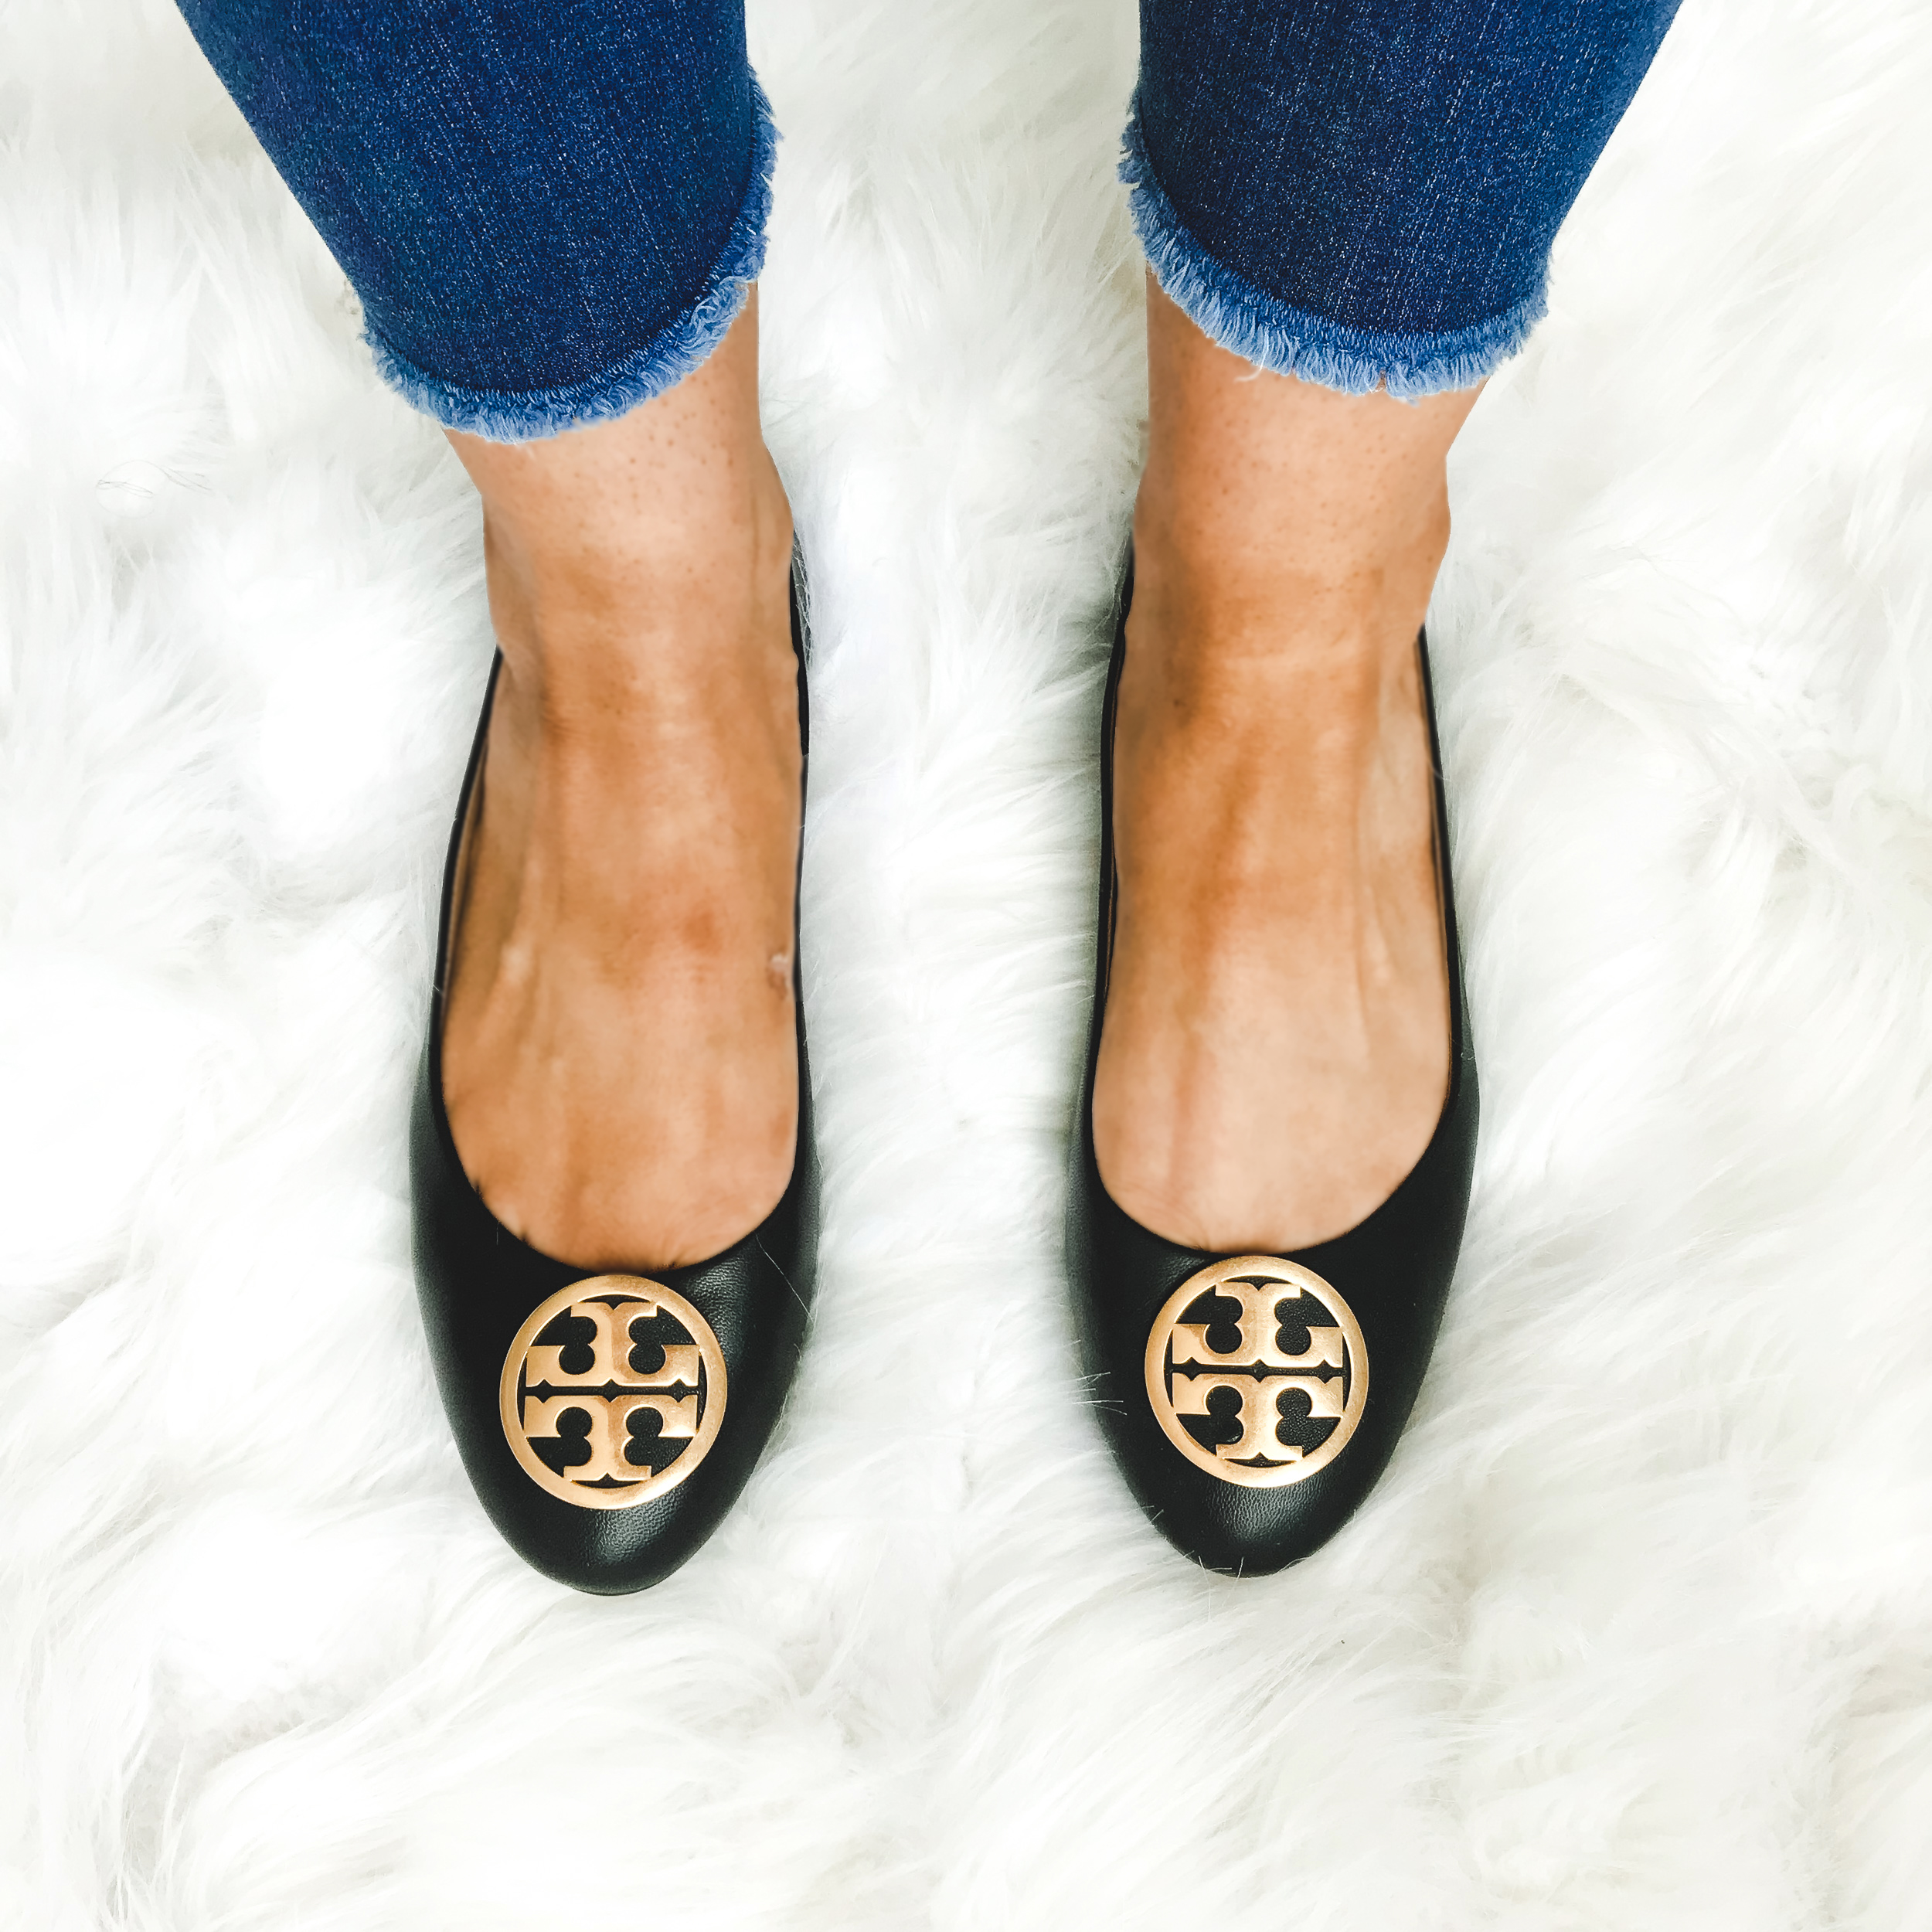 nordstrom-anniversary-sale-review-tory-burch-flats